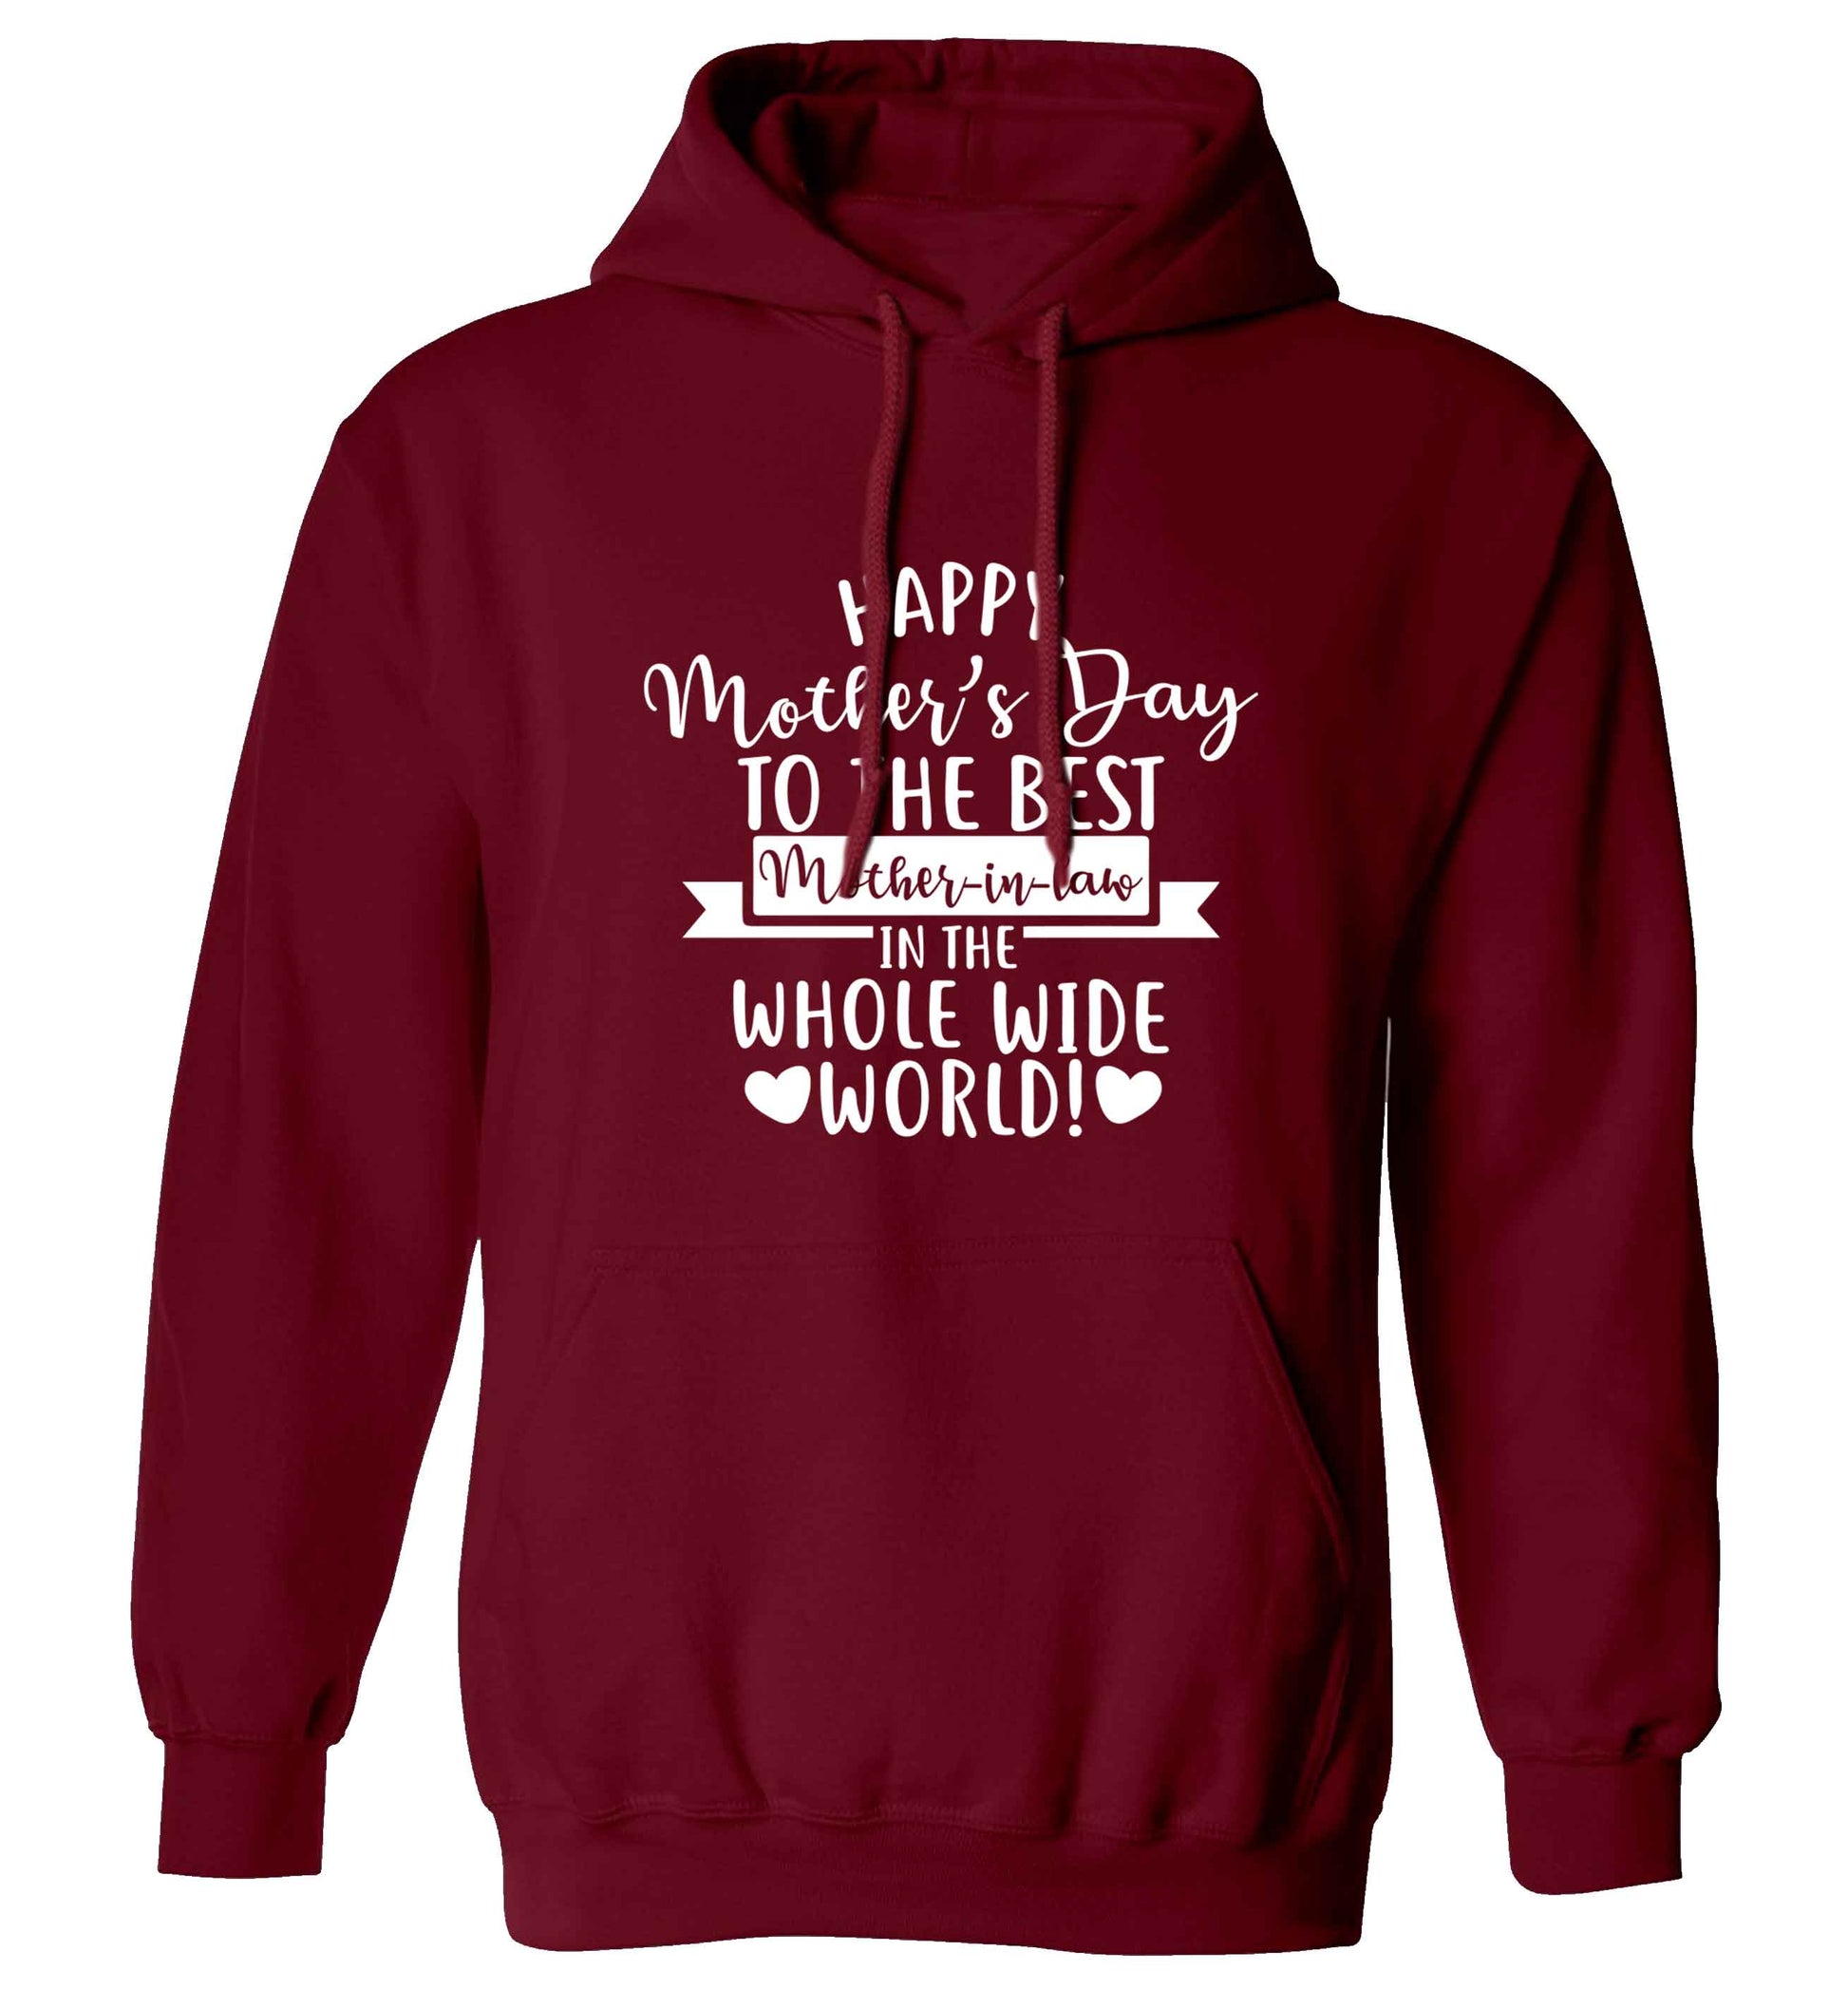 Happy mother's day to the best mother-in law in the world adults unisex maroon hoodie 2XL